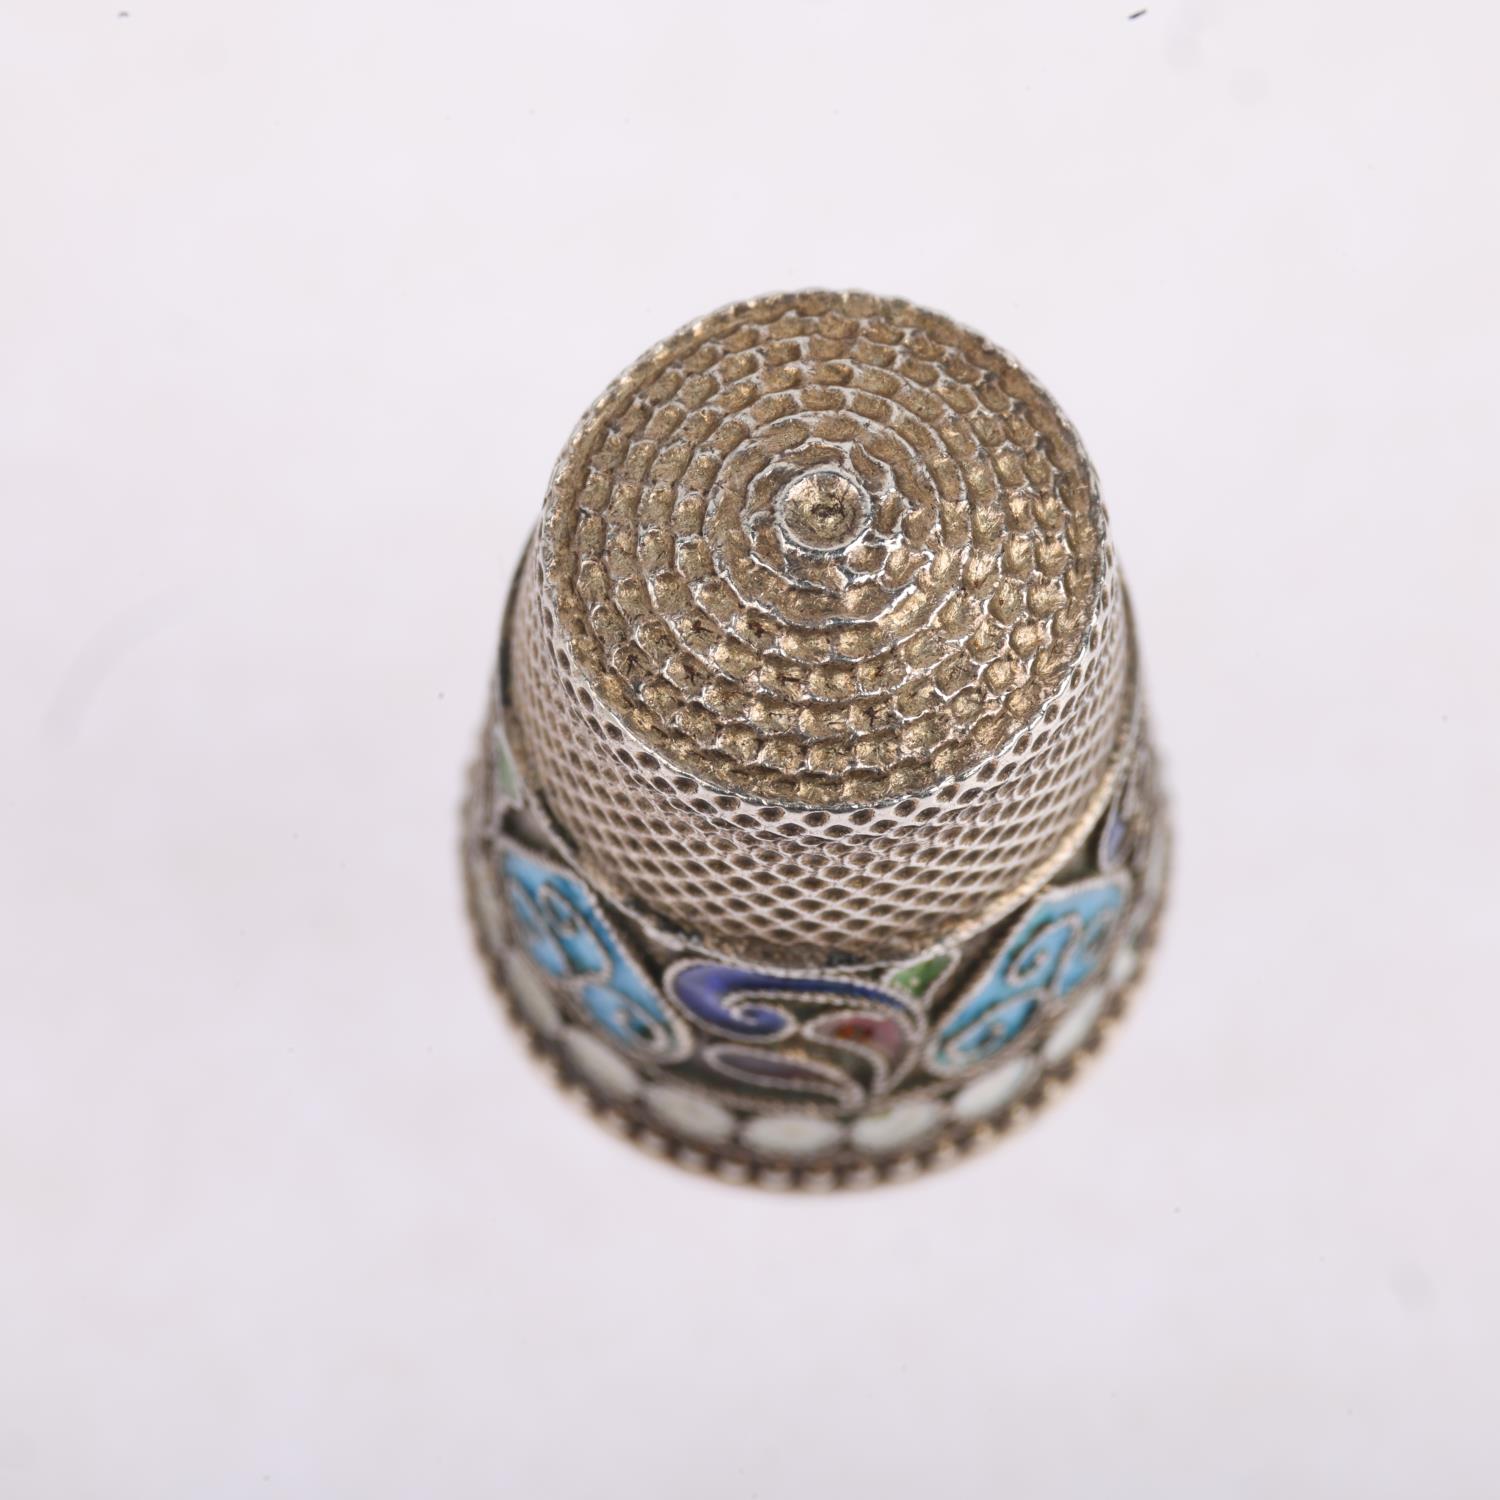 A Russian 84 zolotnik standard silver and champleve enamel thimble, 22.7mm, 6.3g 1 small hole at top - Image 3 of 4